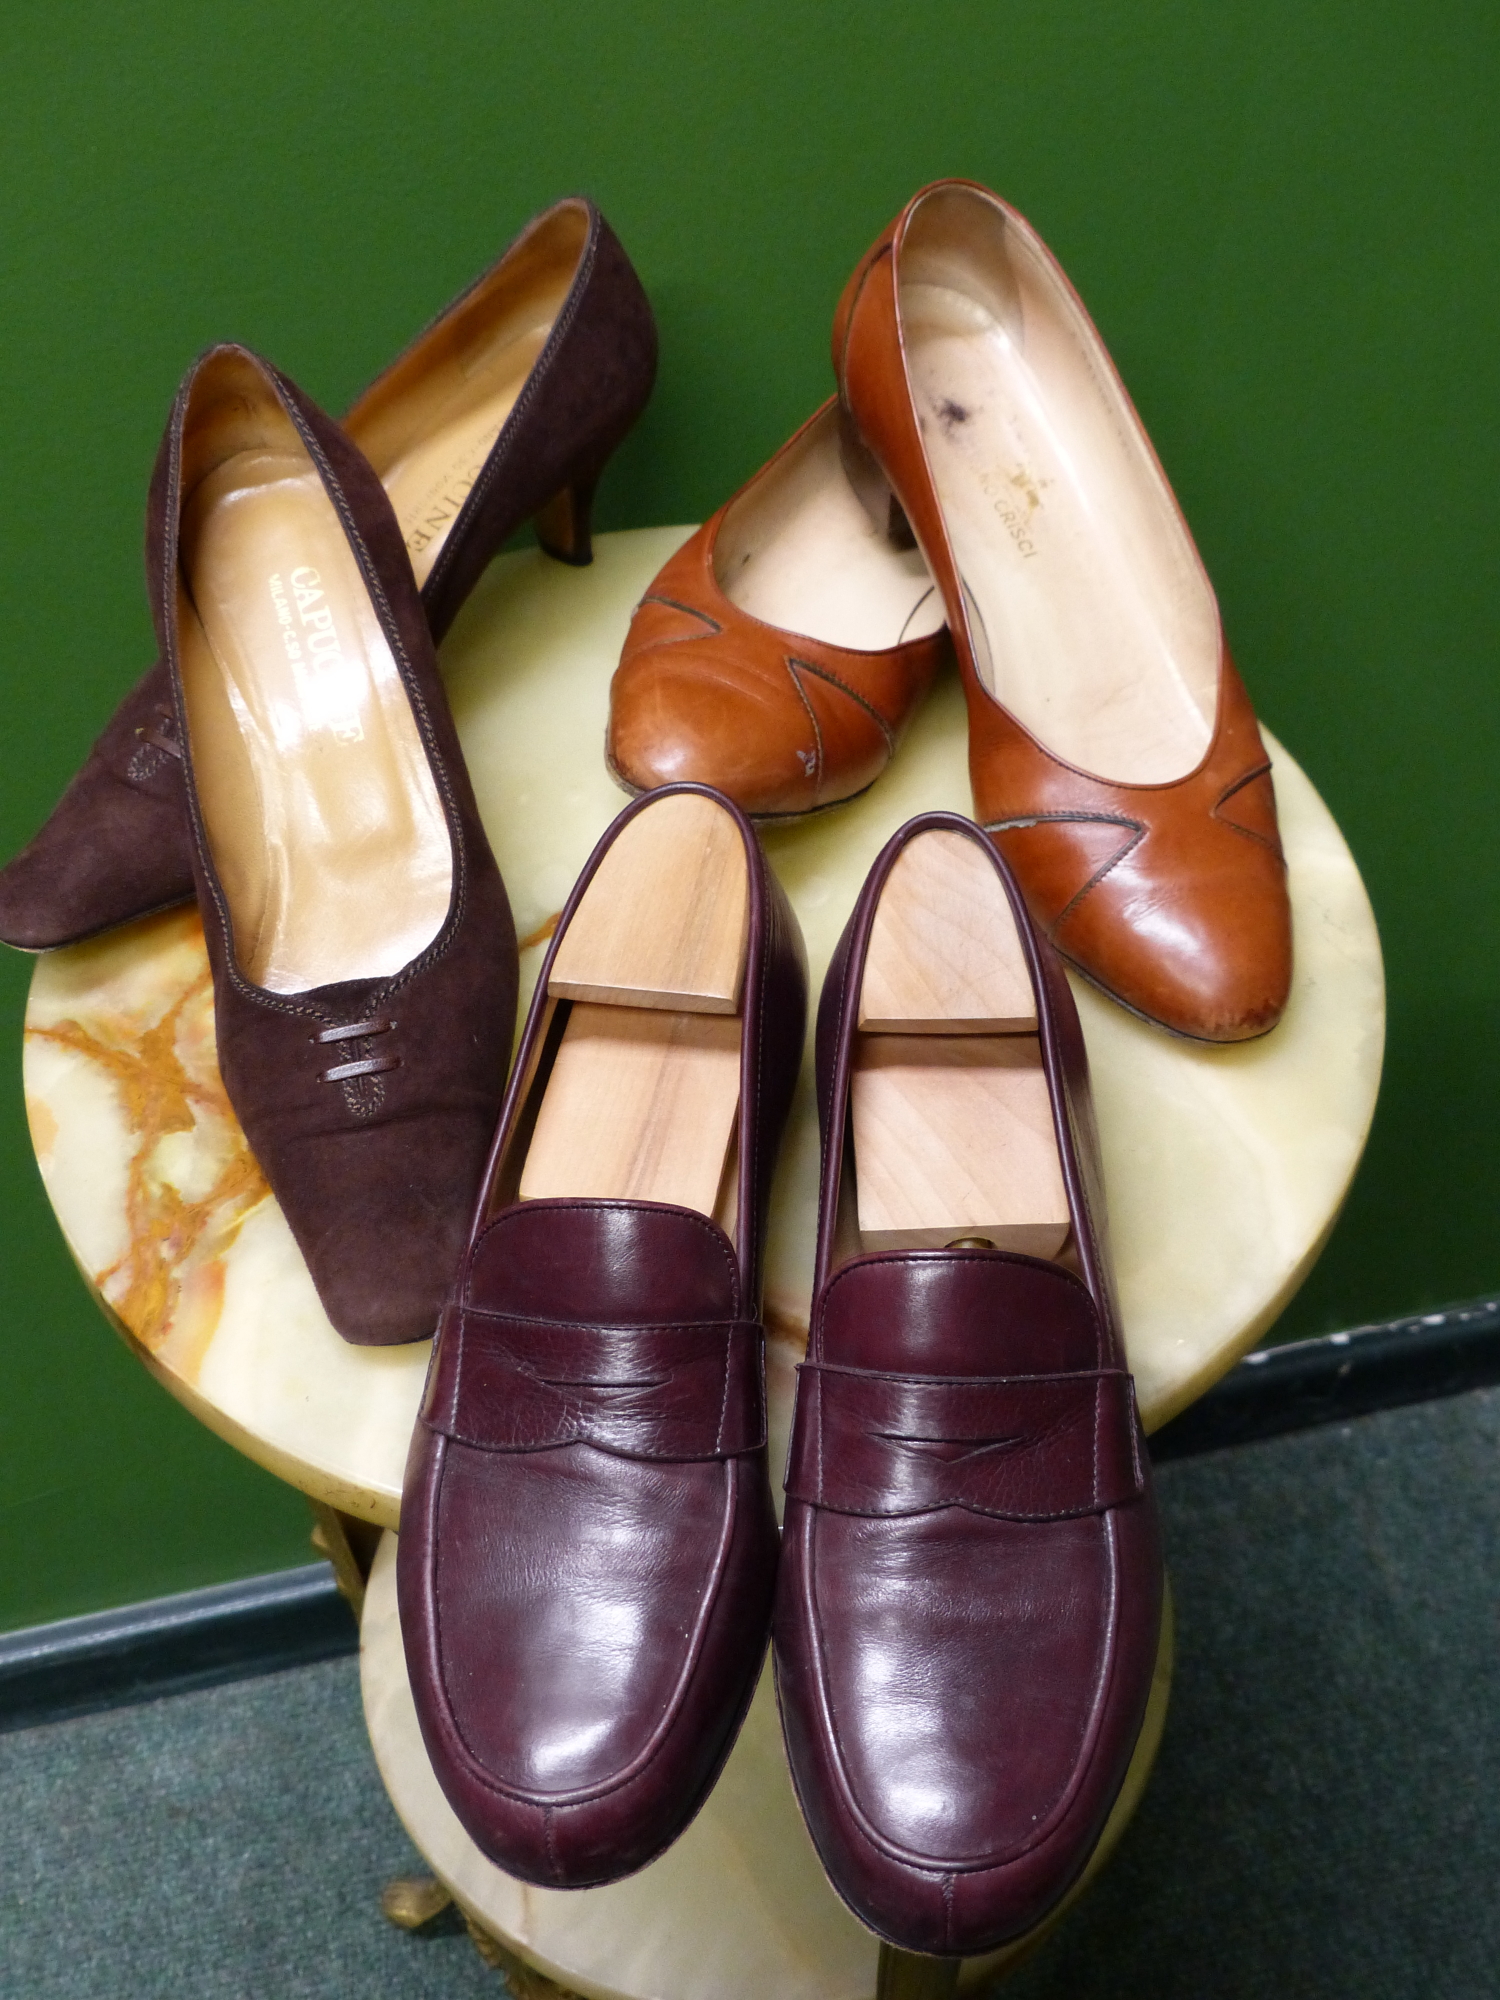 SHOES. UNUTZER BURGUNDY LOAFERS EUR SIZE 40 (BOX) CAPUCINE BROWN SUEDE HEALS UK SIZE 6, AND TANINO